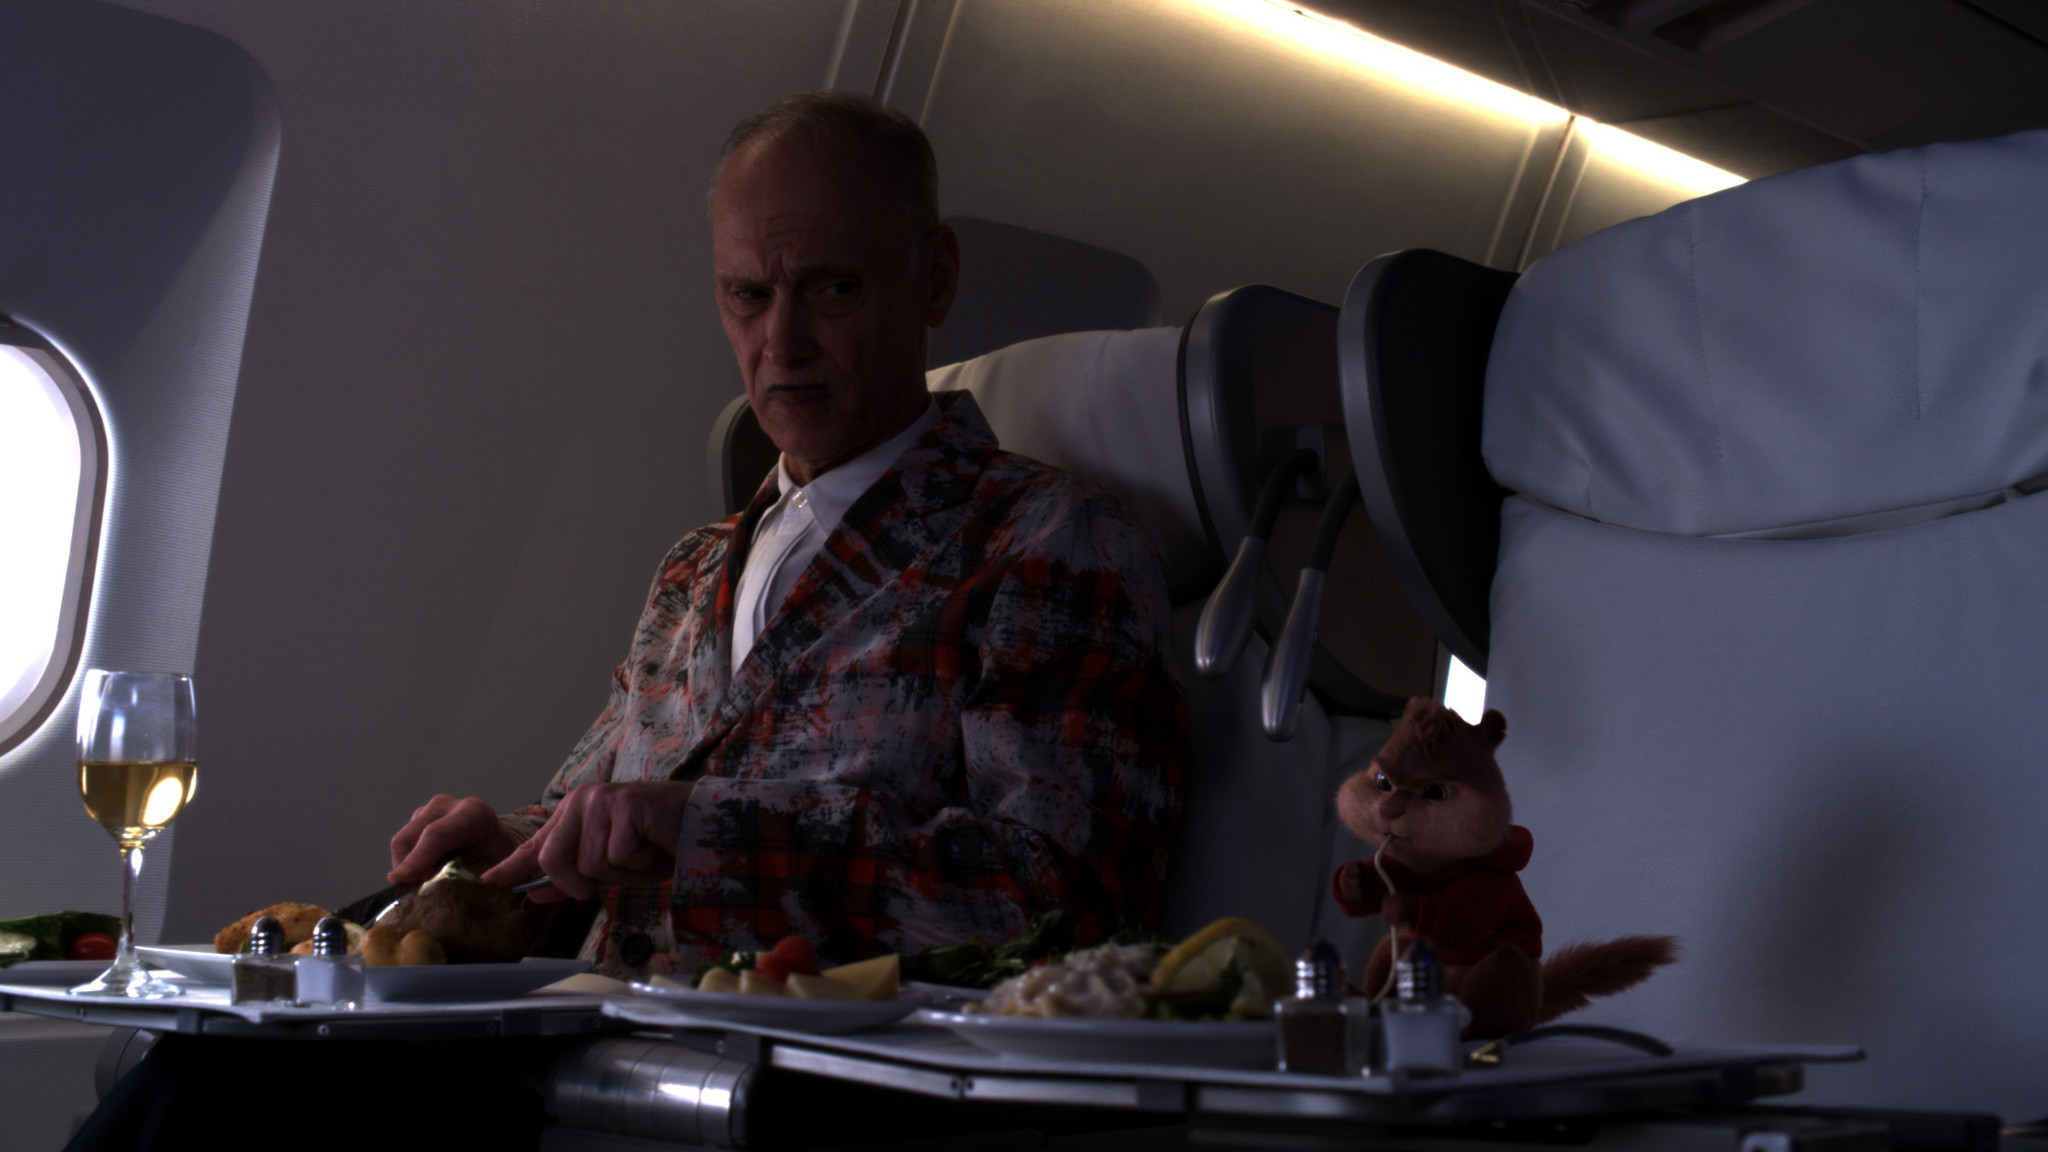 John Waters in Alvin and the Chipmunks